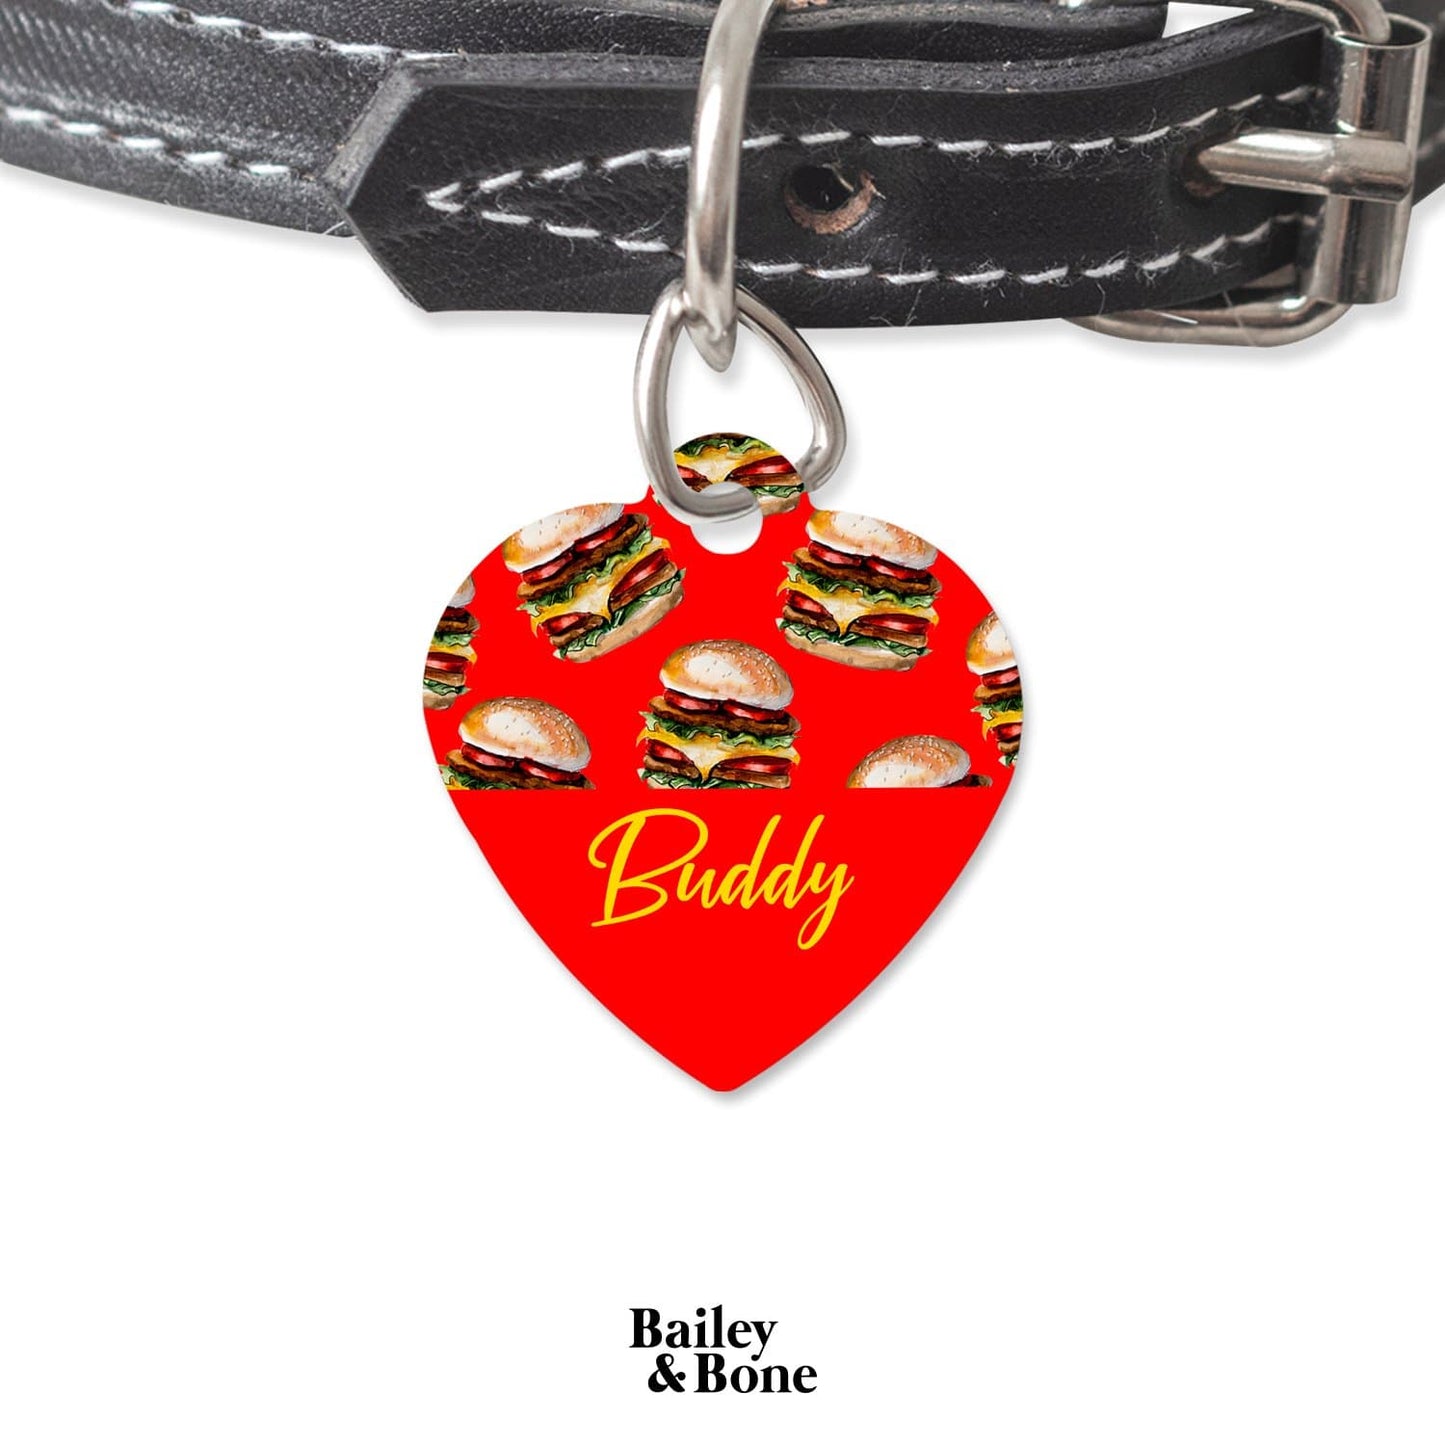 Bailey And Bone Pet Tag Heart Red And Yellow Burger Pet Tag